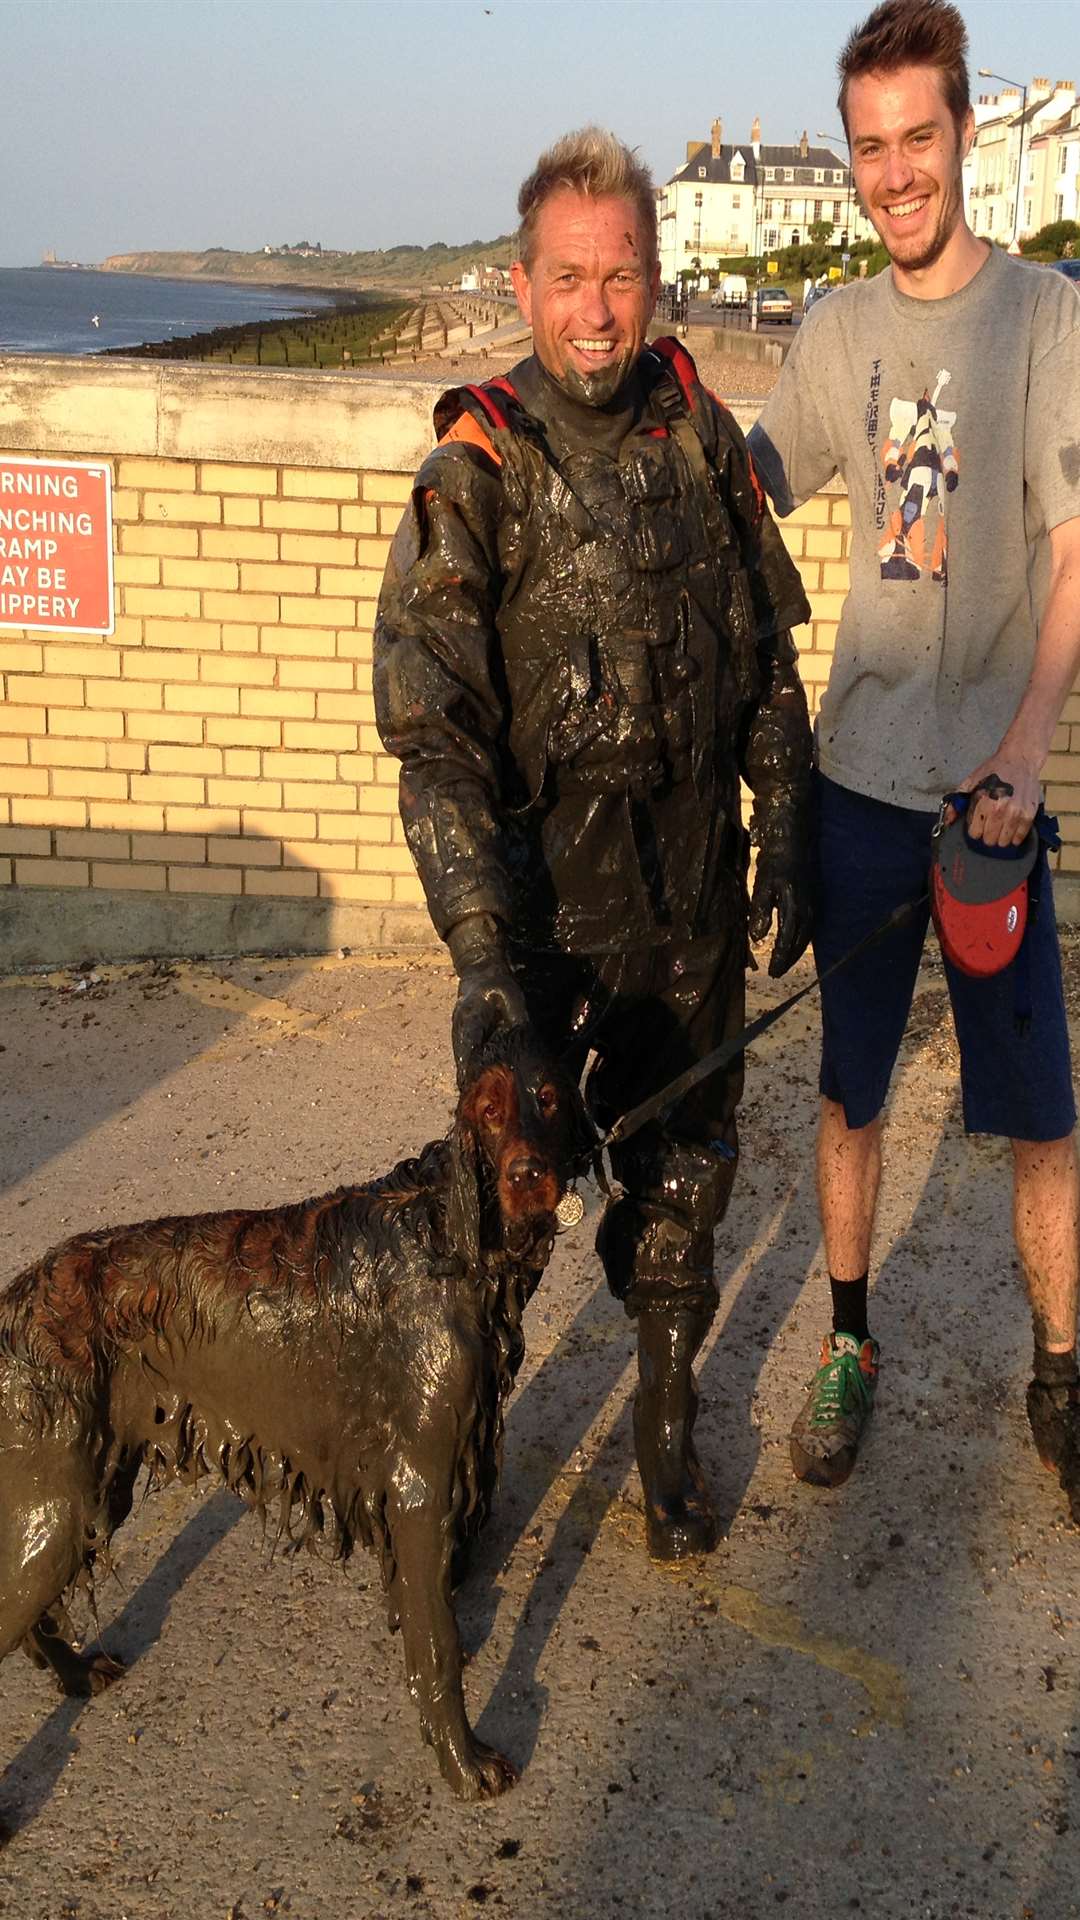 Owner Joseph Marsh's Irish setter Rufus shortly after being rescued by a firefighter